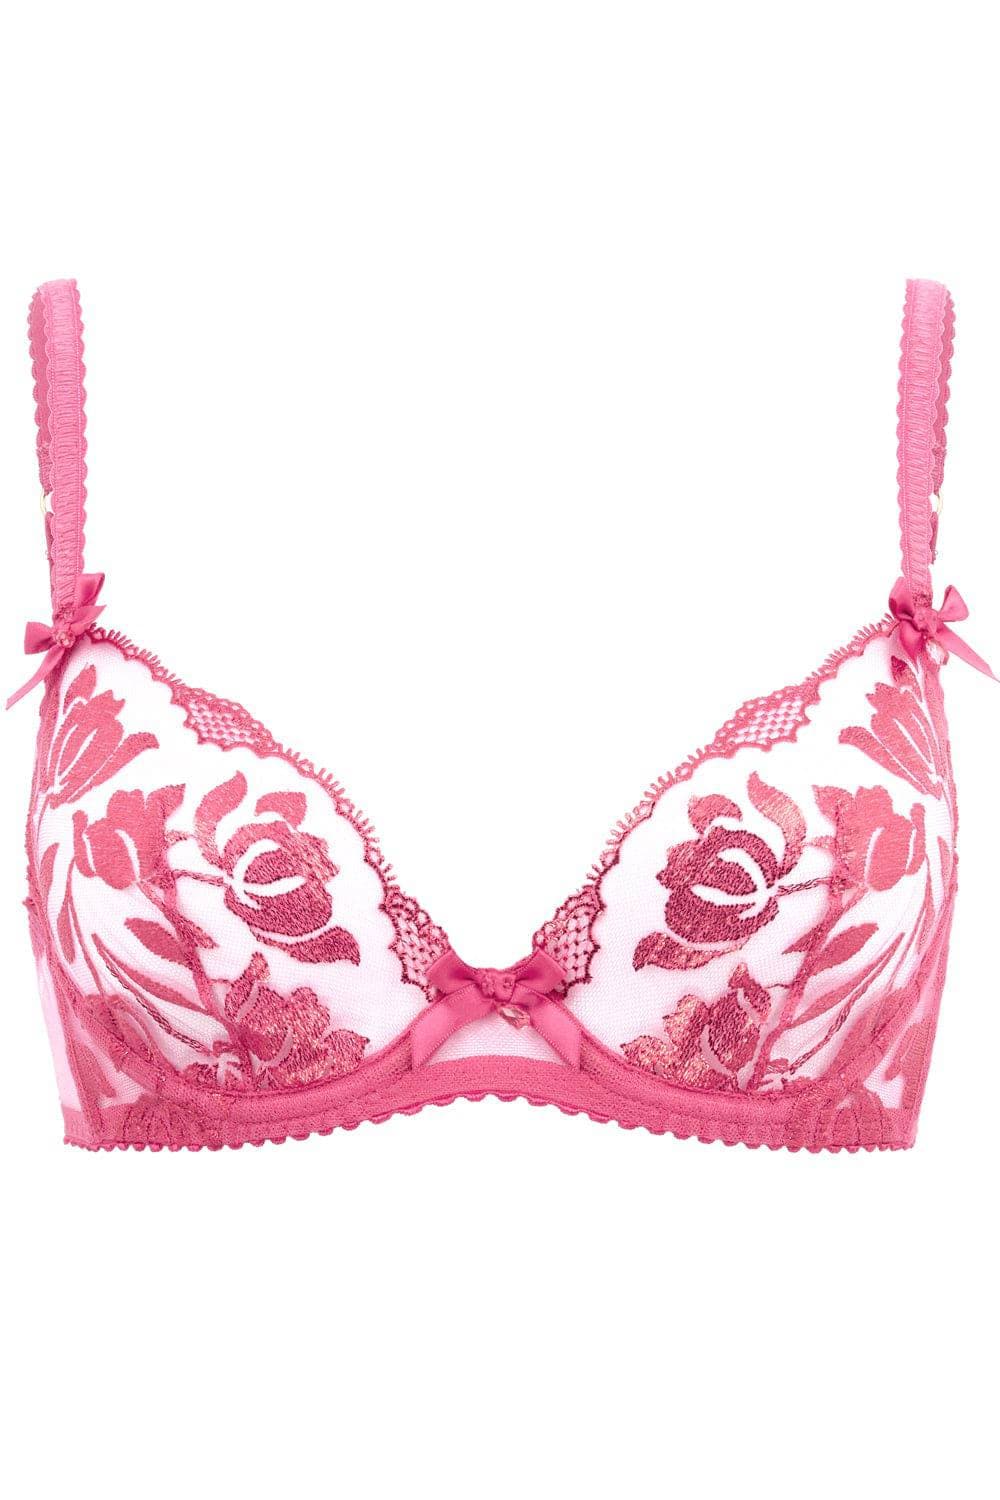 Anger molekyle Anonym Agent Provocateur Sparkle Hot Pink Plunge Underwired Bra – Naughty Knickers